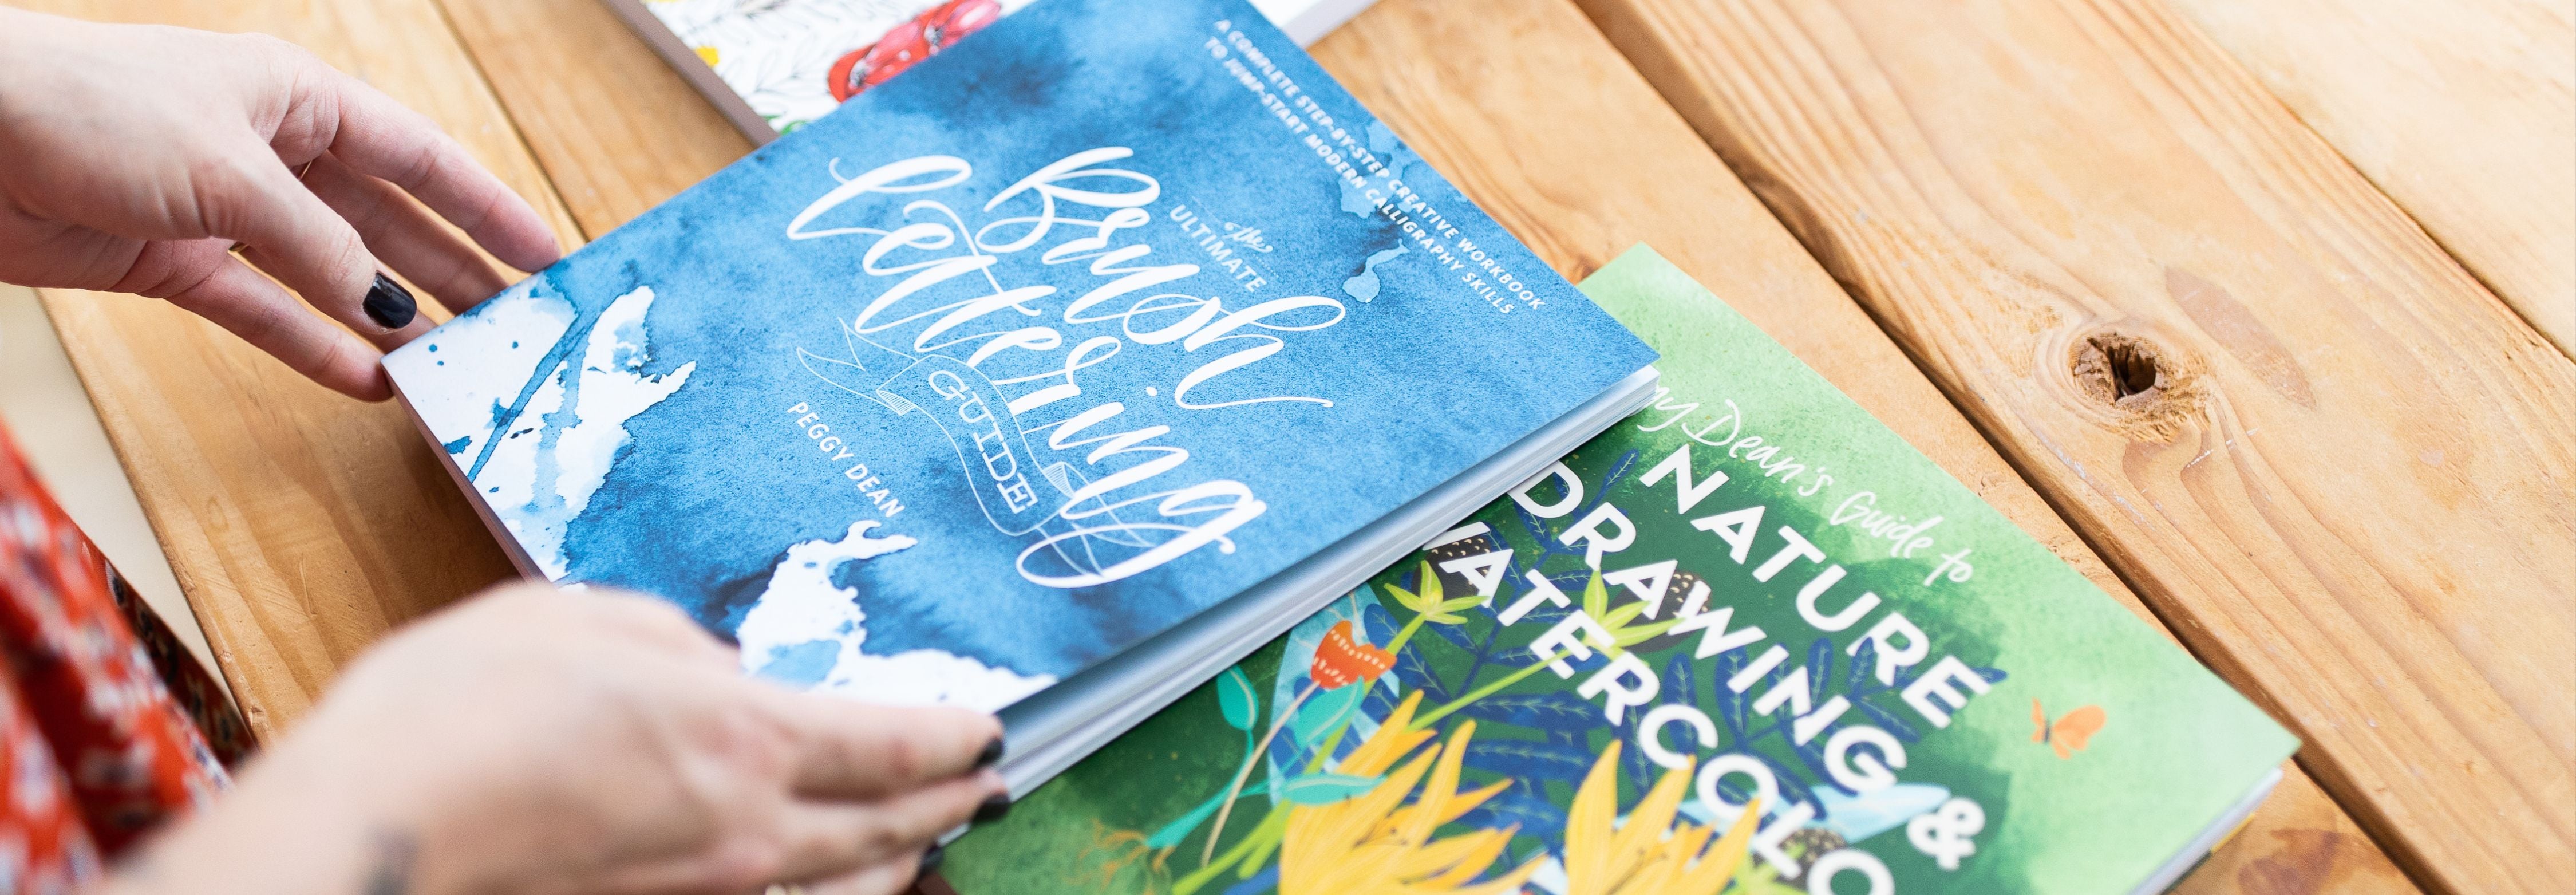 The Ultimate Brush Lettering Guide by Peggy Dean